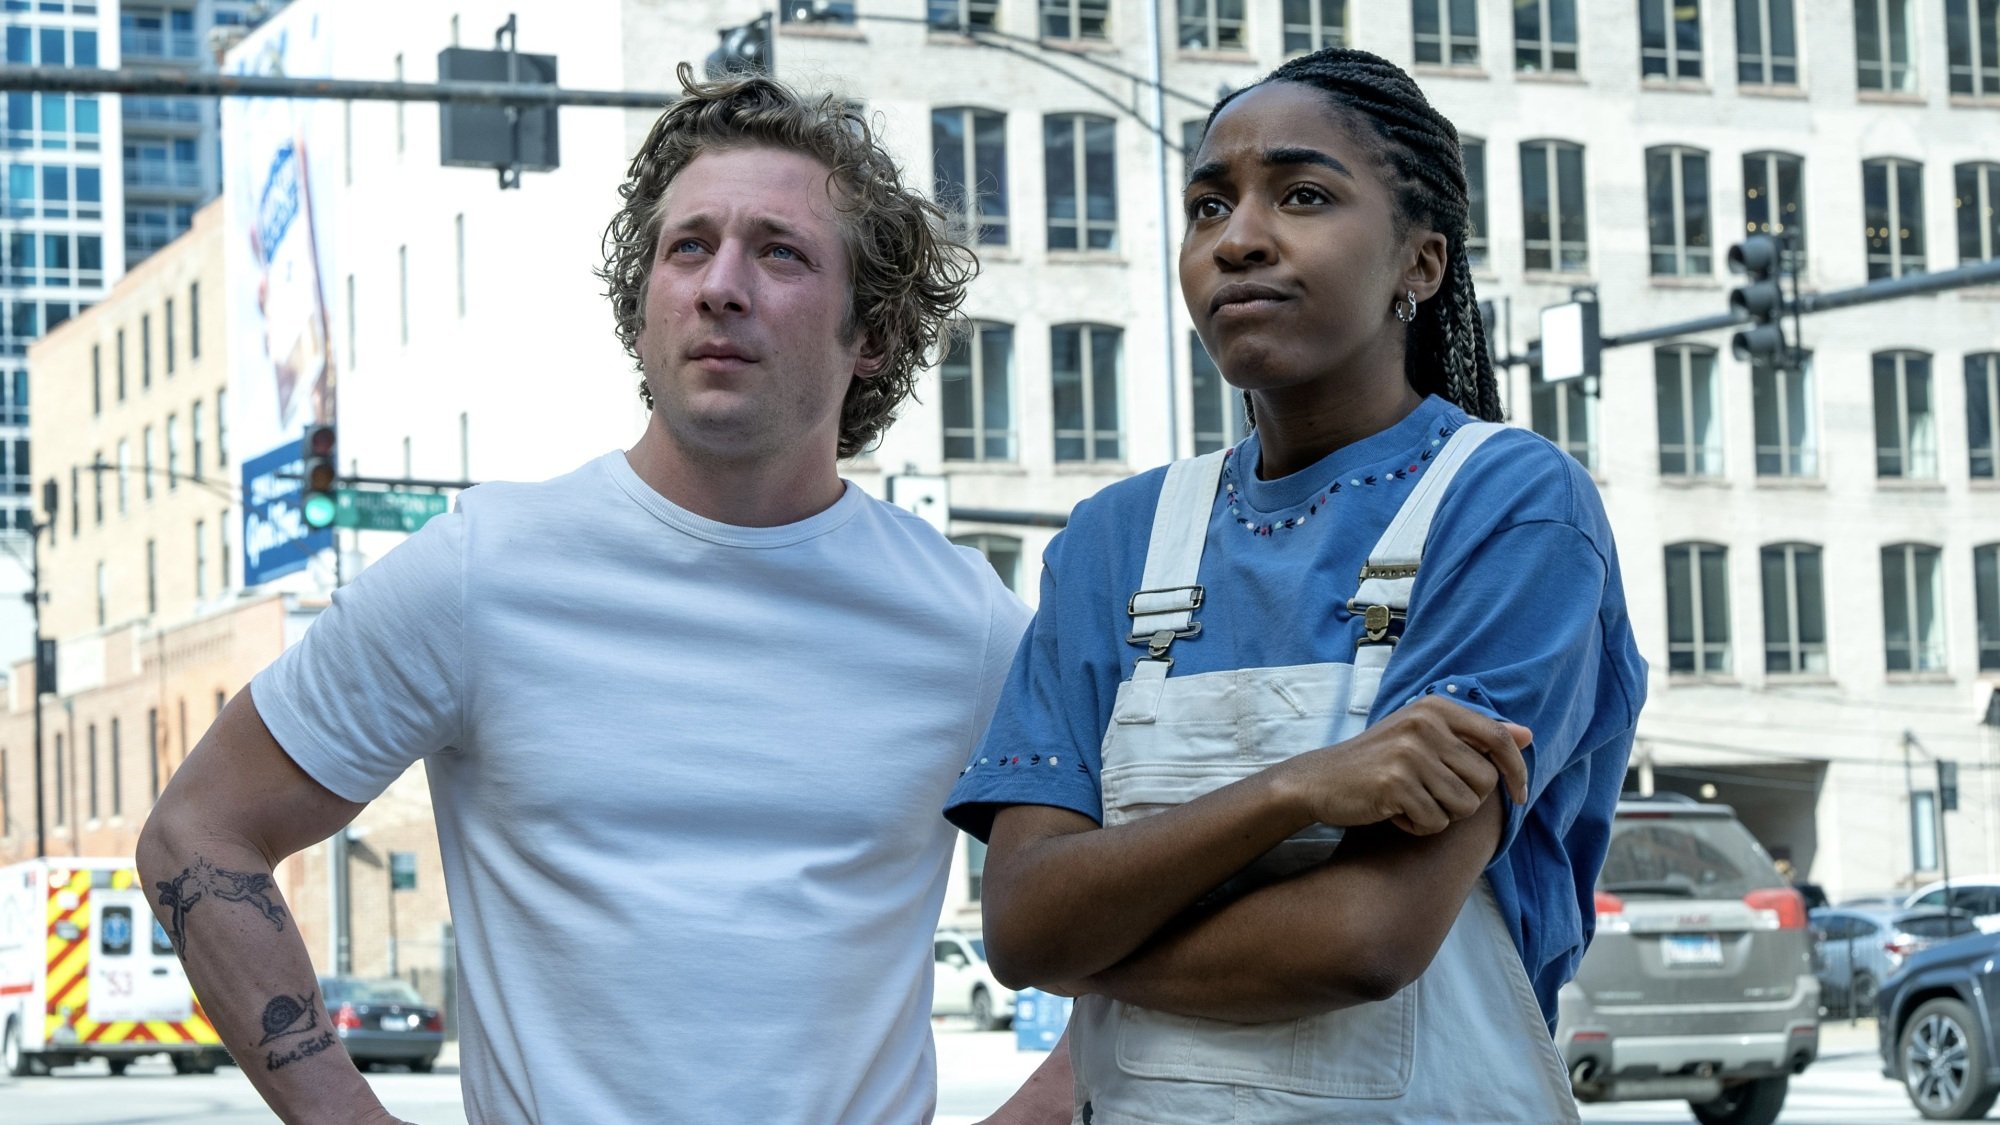 A man in a white T-shirt and a woman in a white chef's apron stand on a Chicago street.